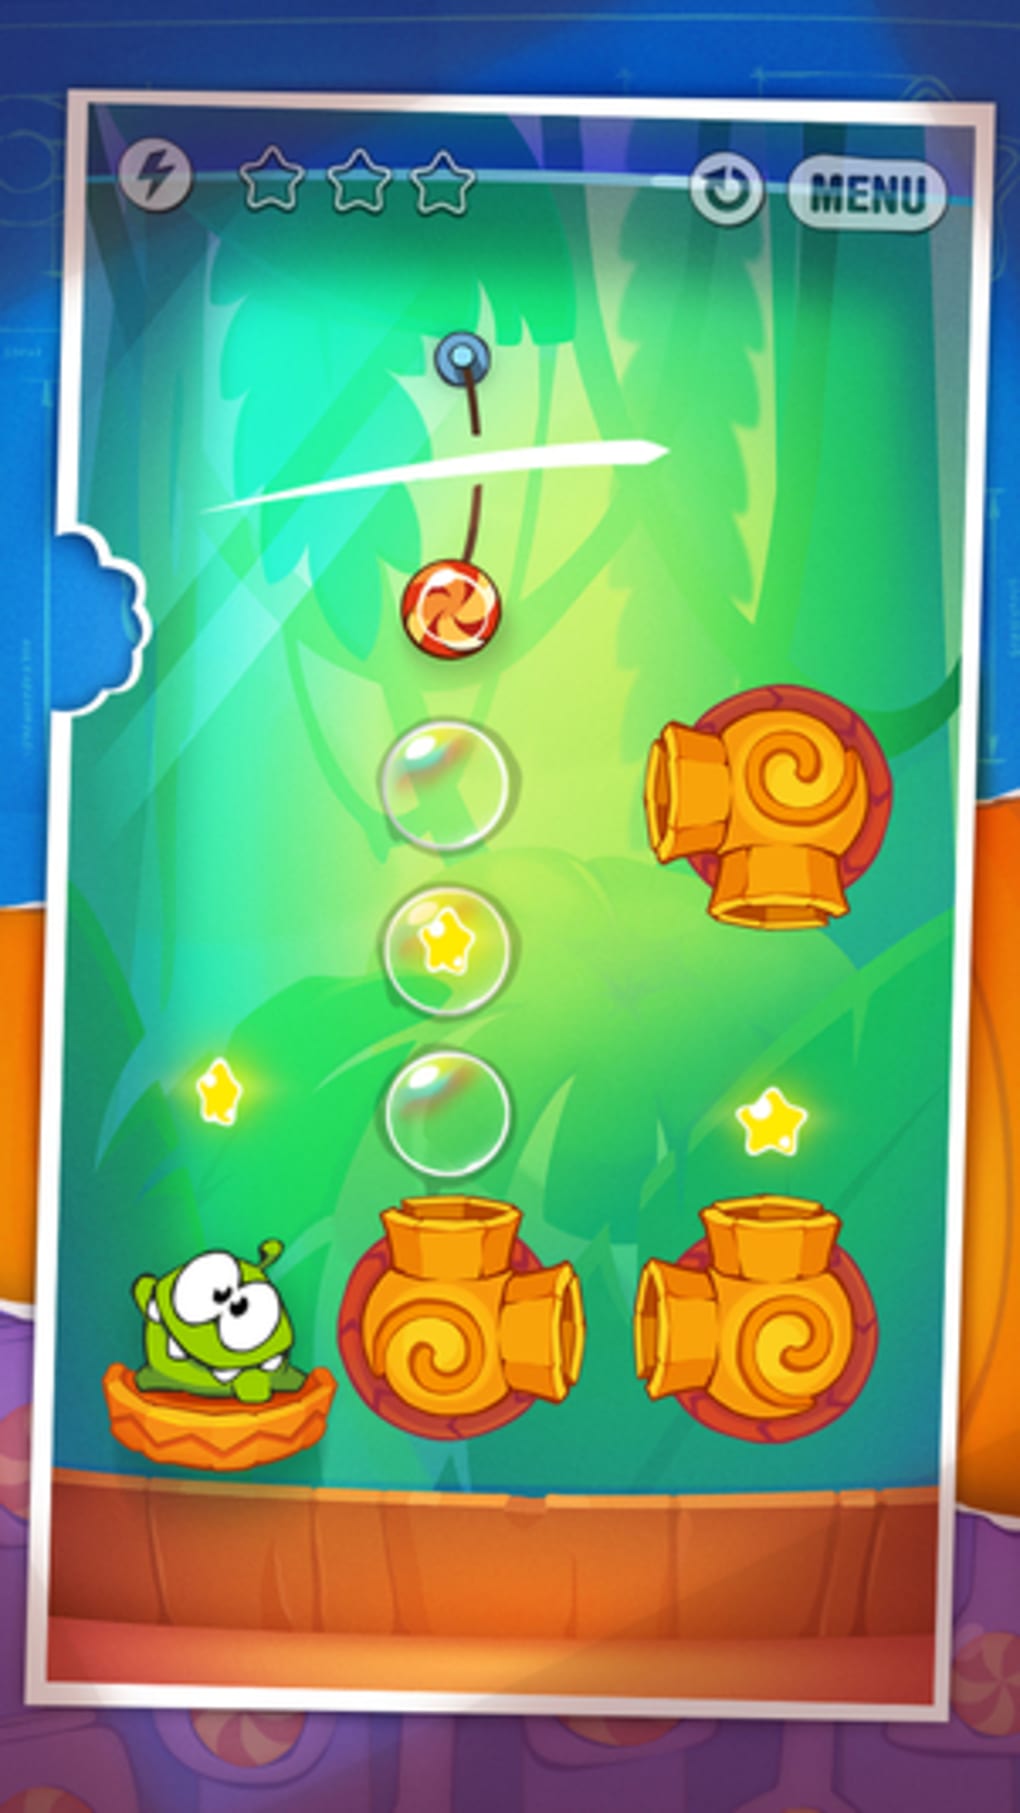 iPhone + iPad Gems: Cut the Rope Experiments, Shoot the Birds